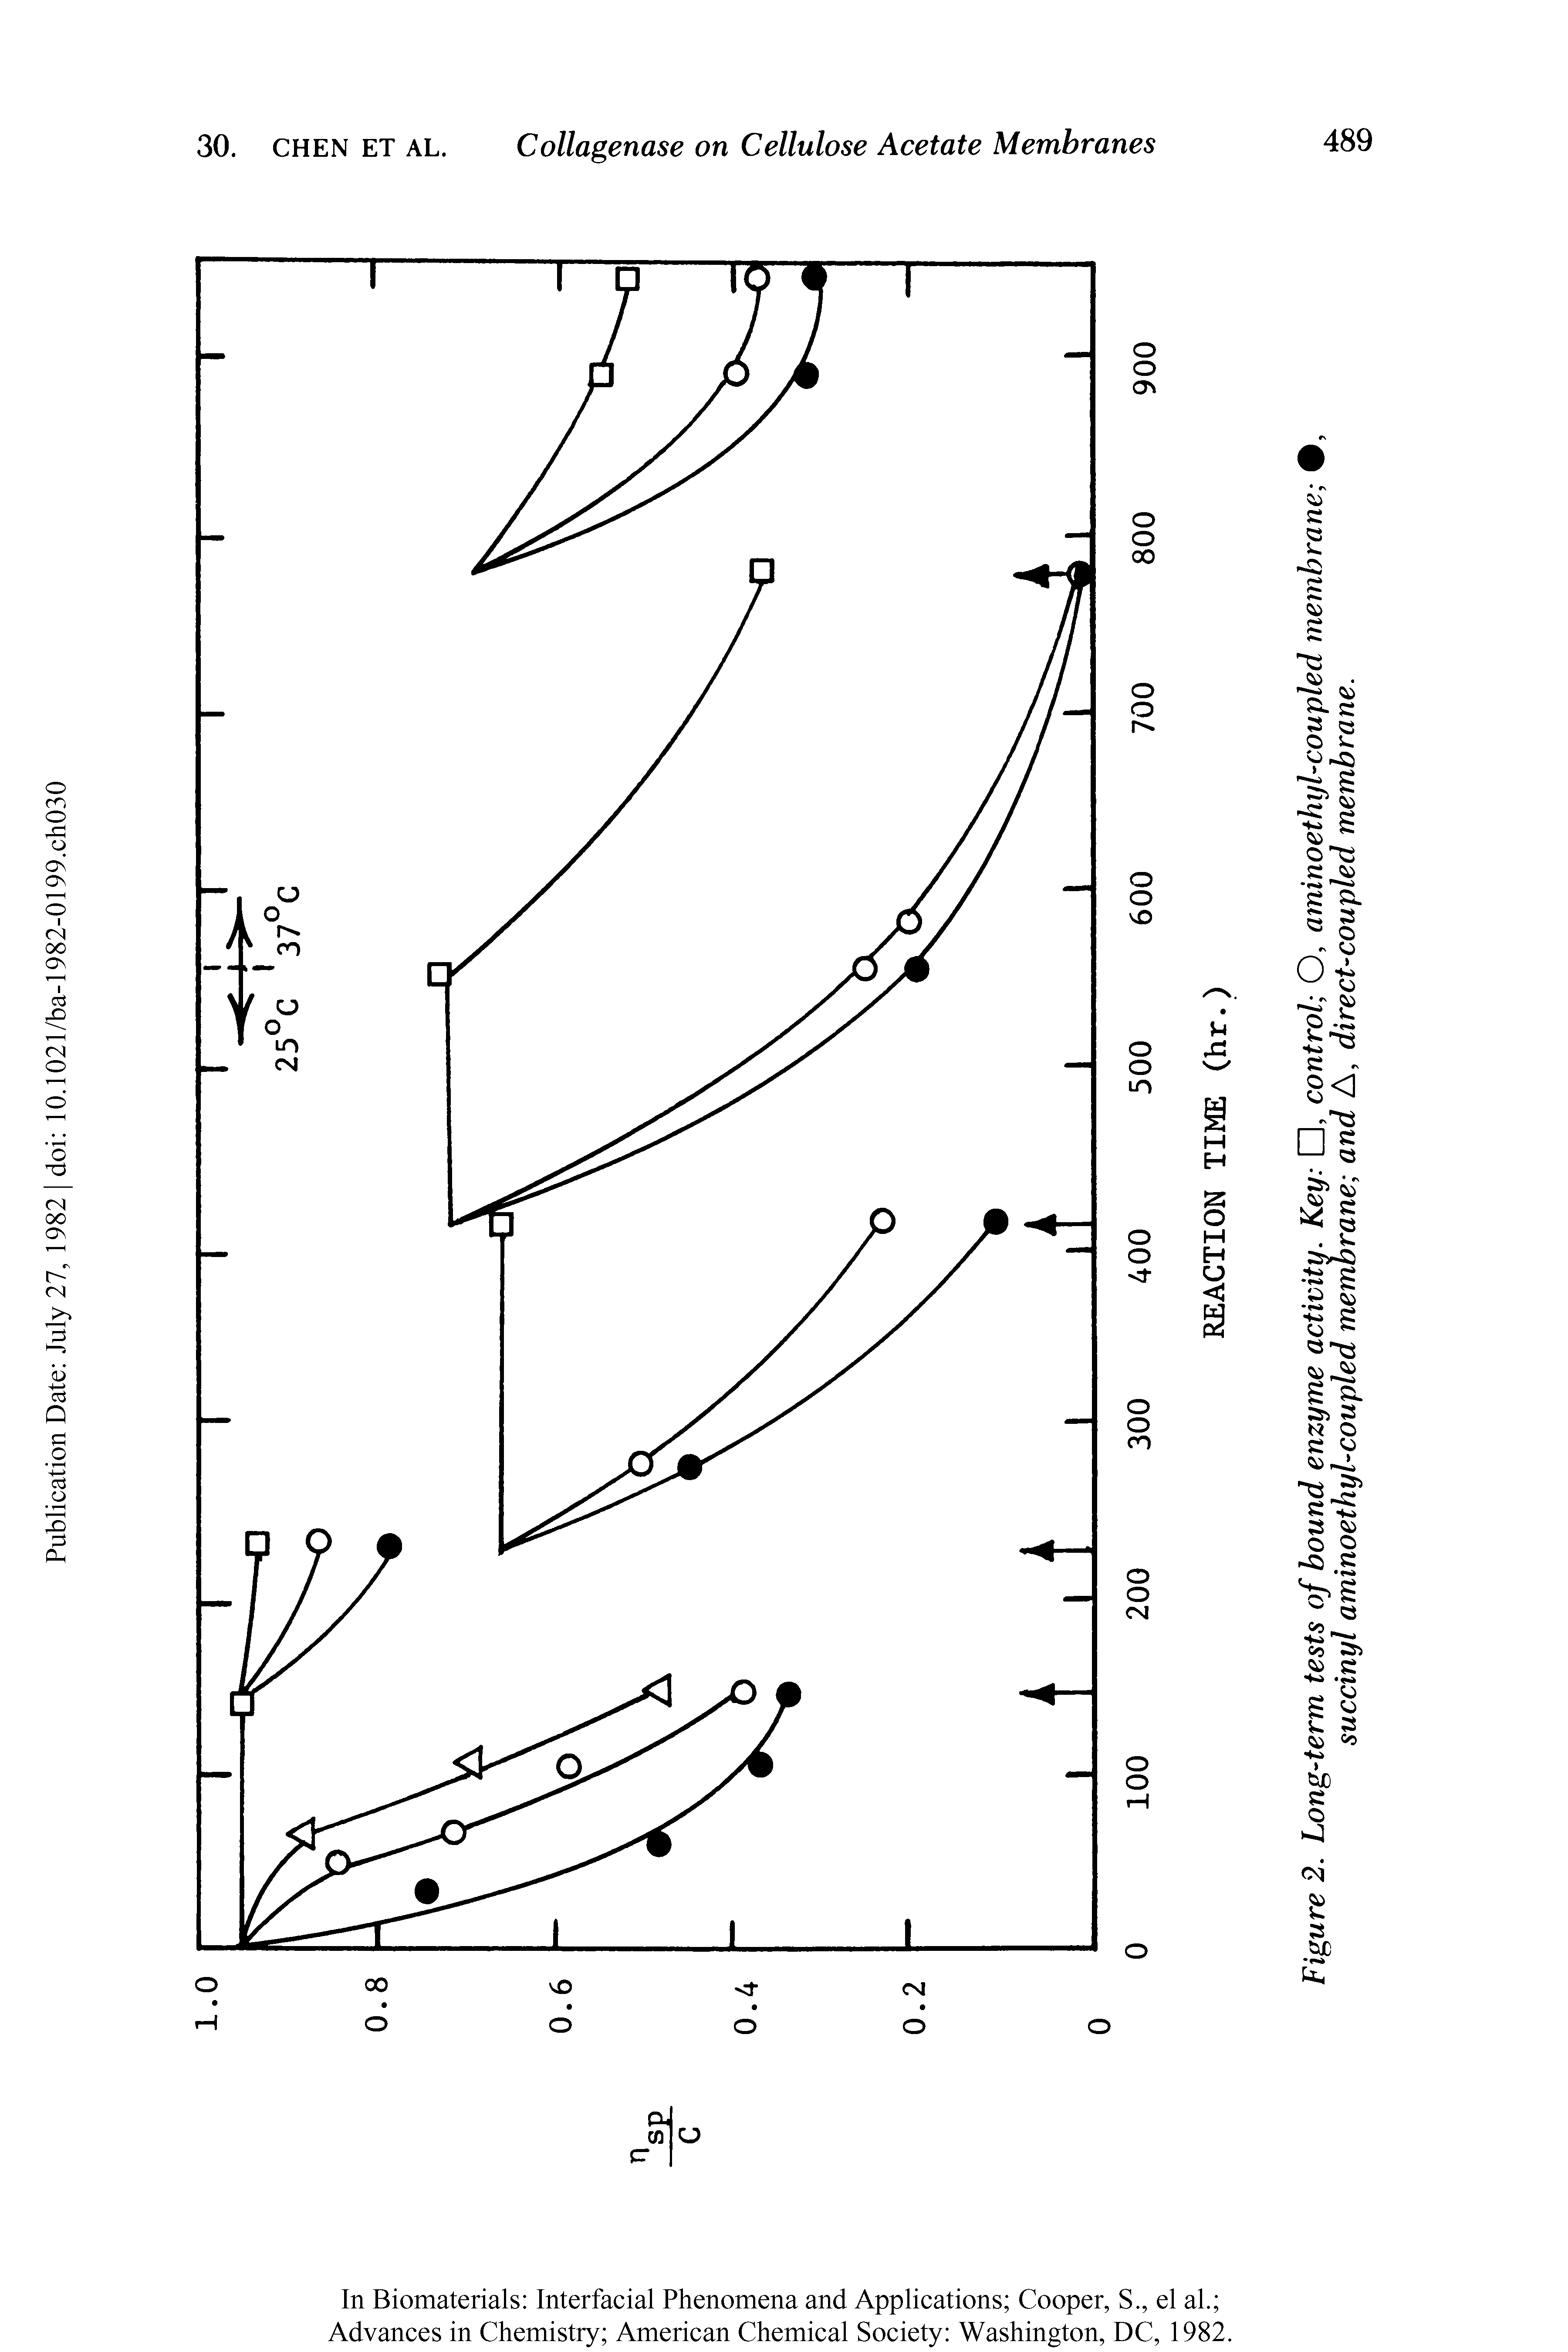 Figure 2. Long-term tests of bound enzyme activity. Key , control O, aminoethyl-coupled membrane succinyl aminoethyl-coupled membrane and A, direct-coupled membrane.